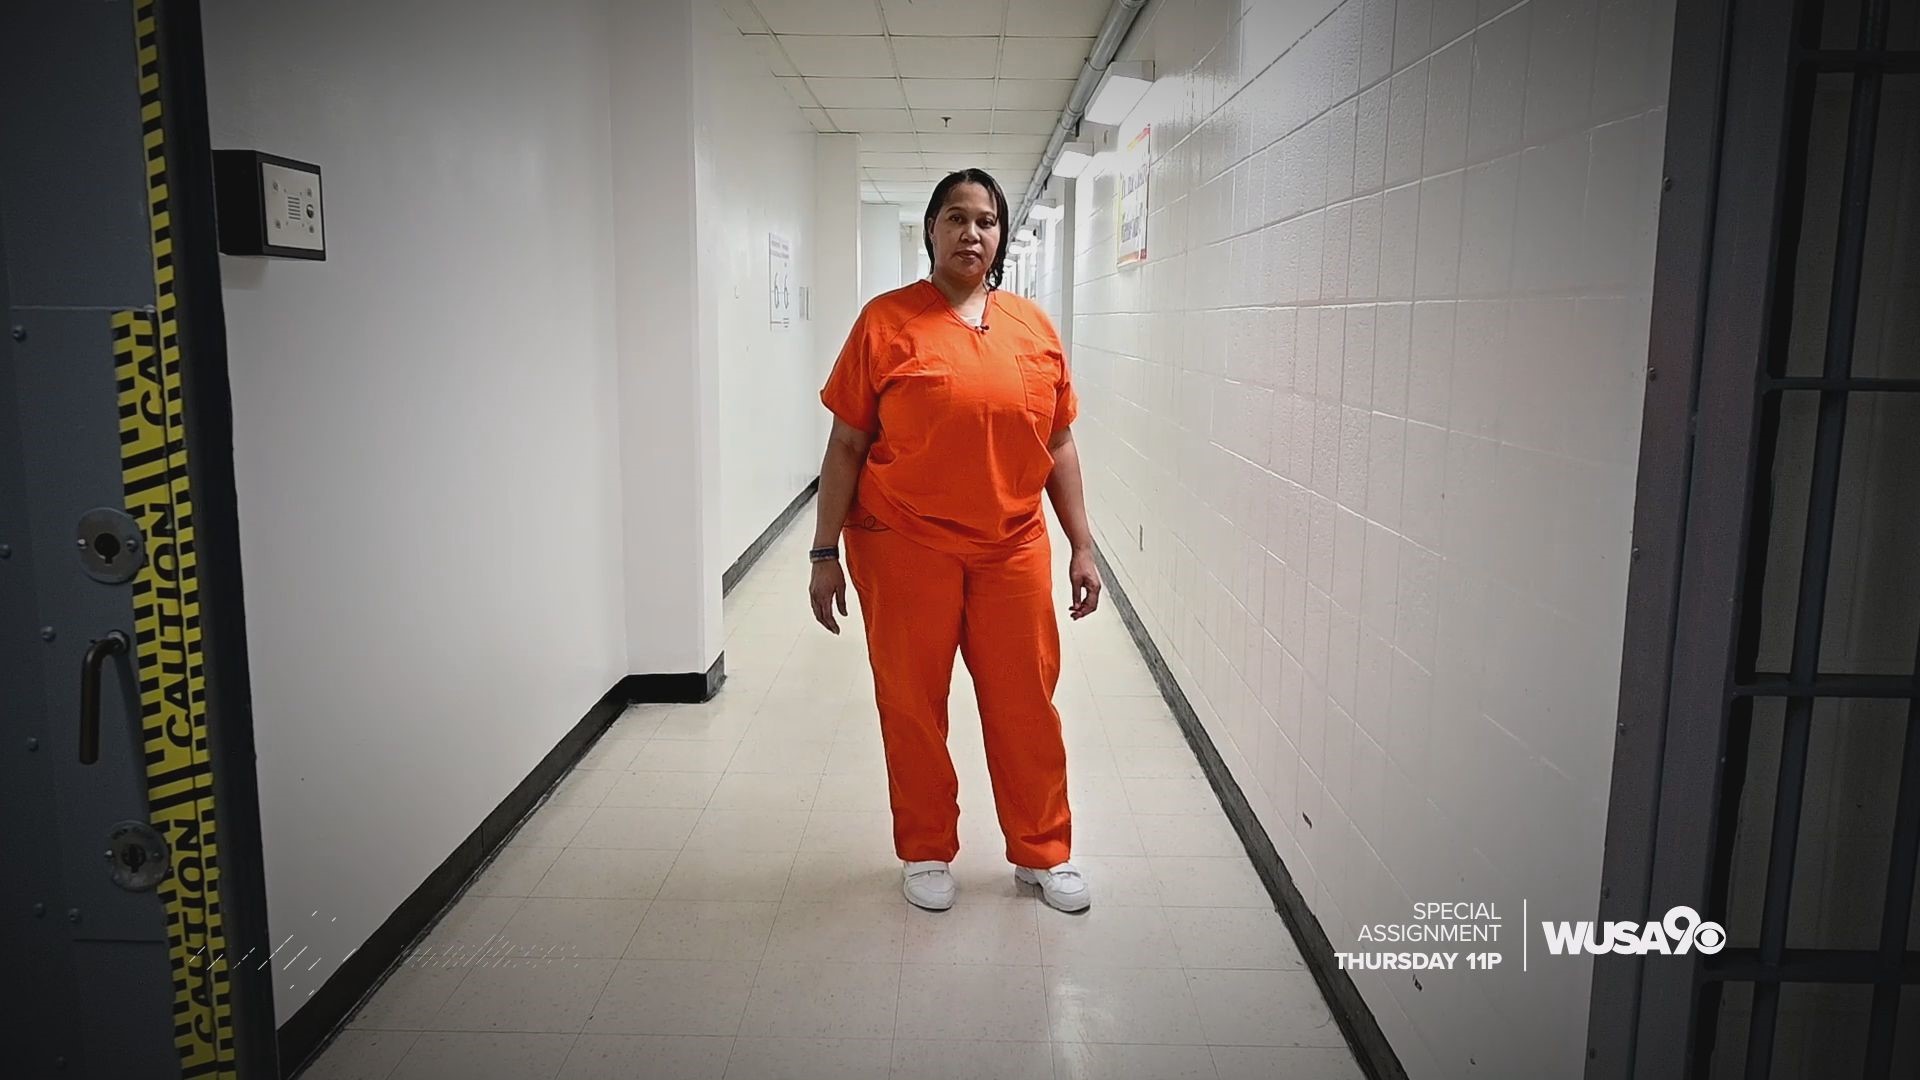 In an interview from jail, Shanteari Weems says she "snapped" and shot her husband in a hotel room after a parent she trusted said he'd abused her child.